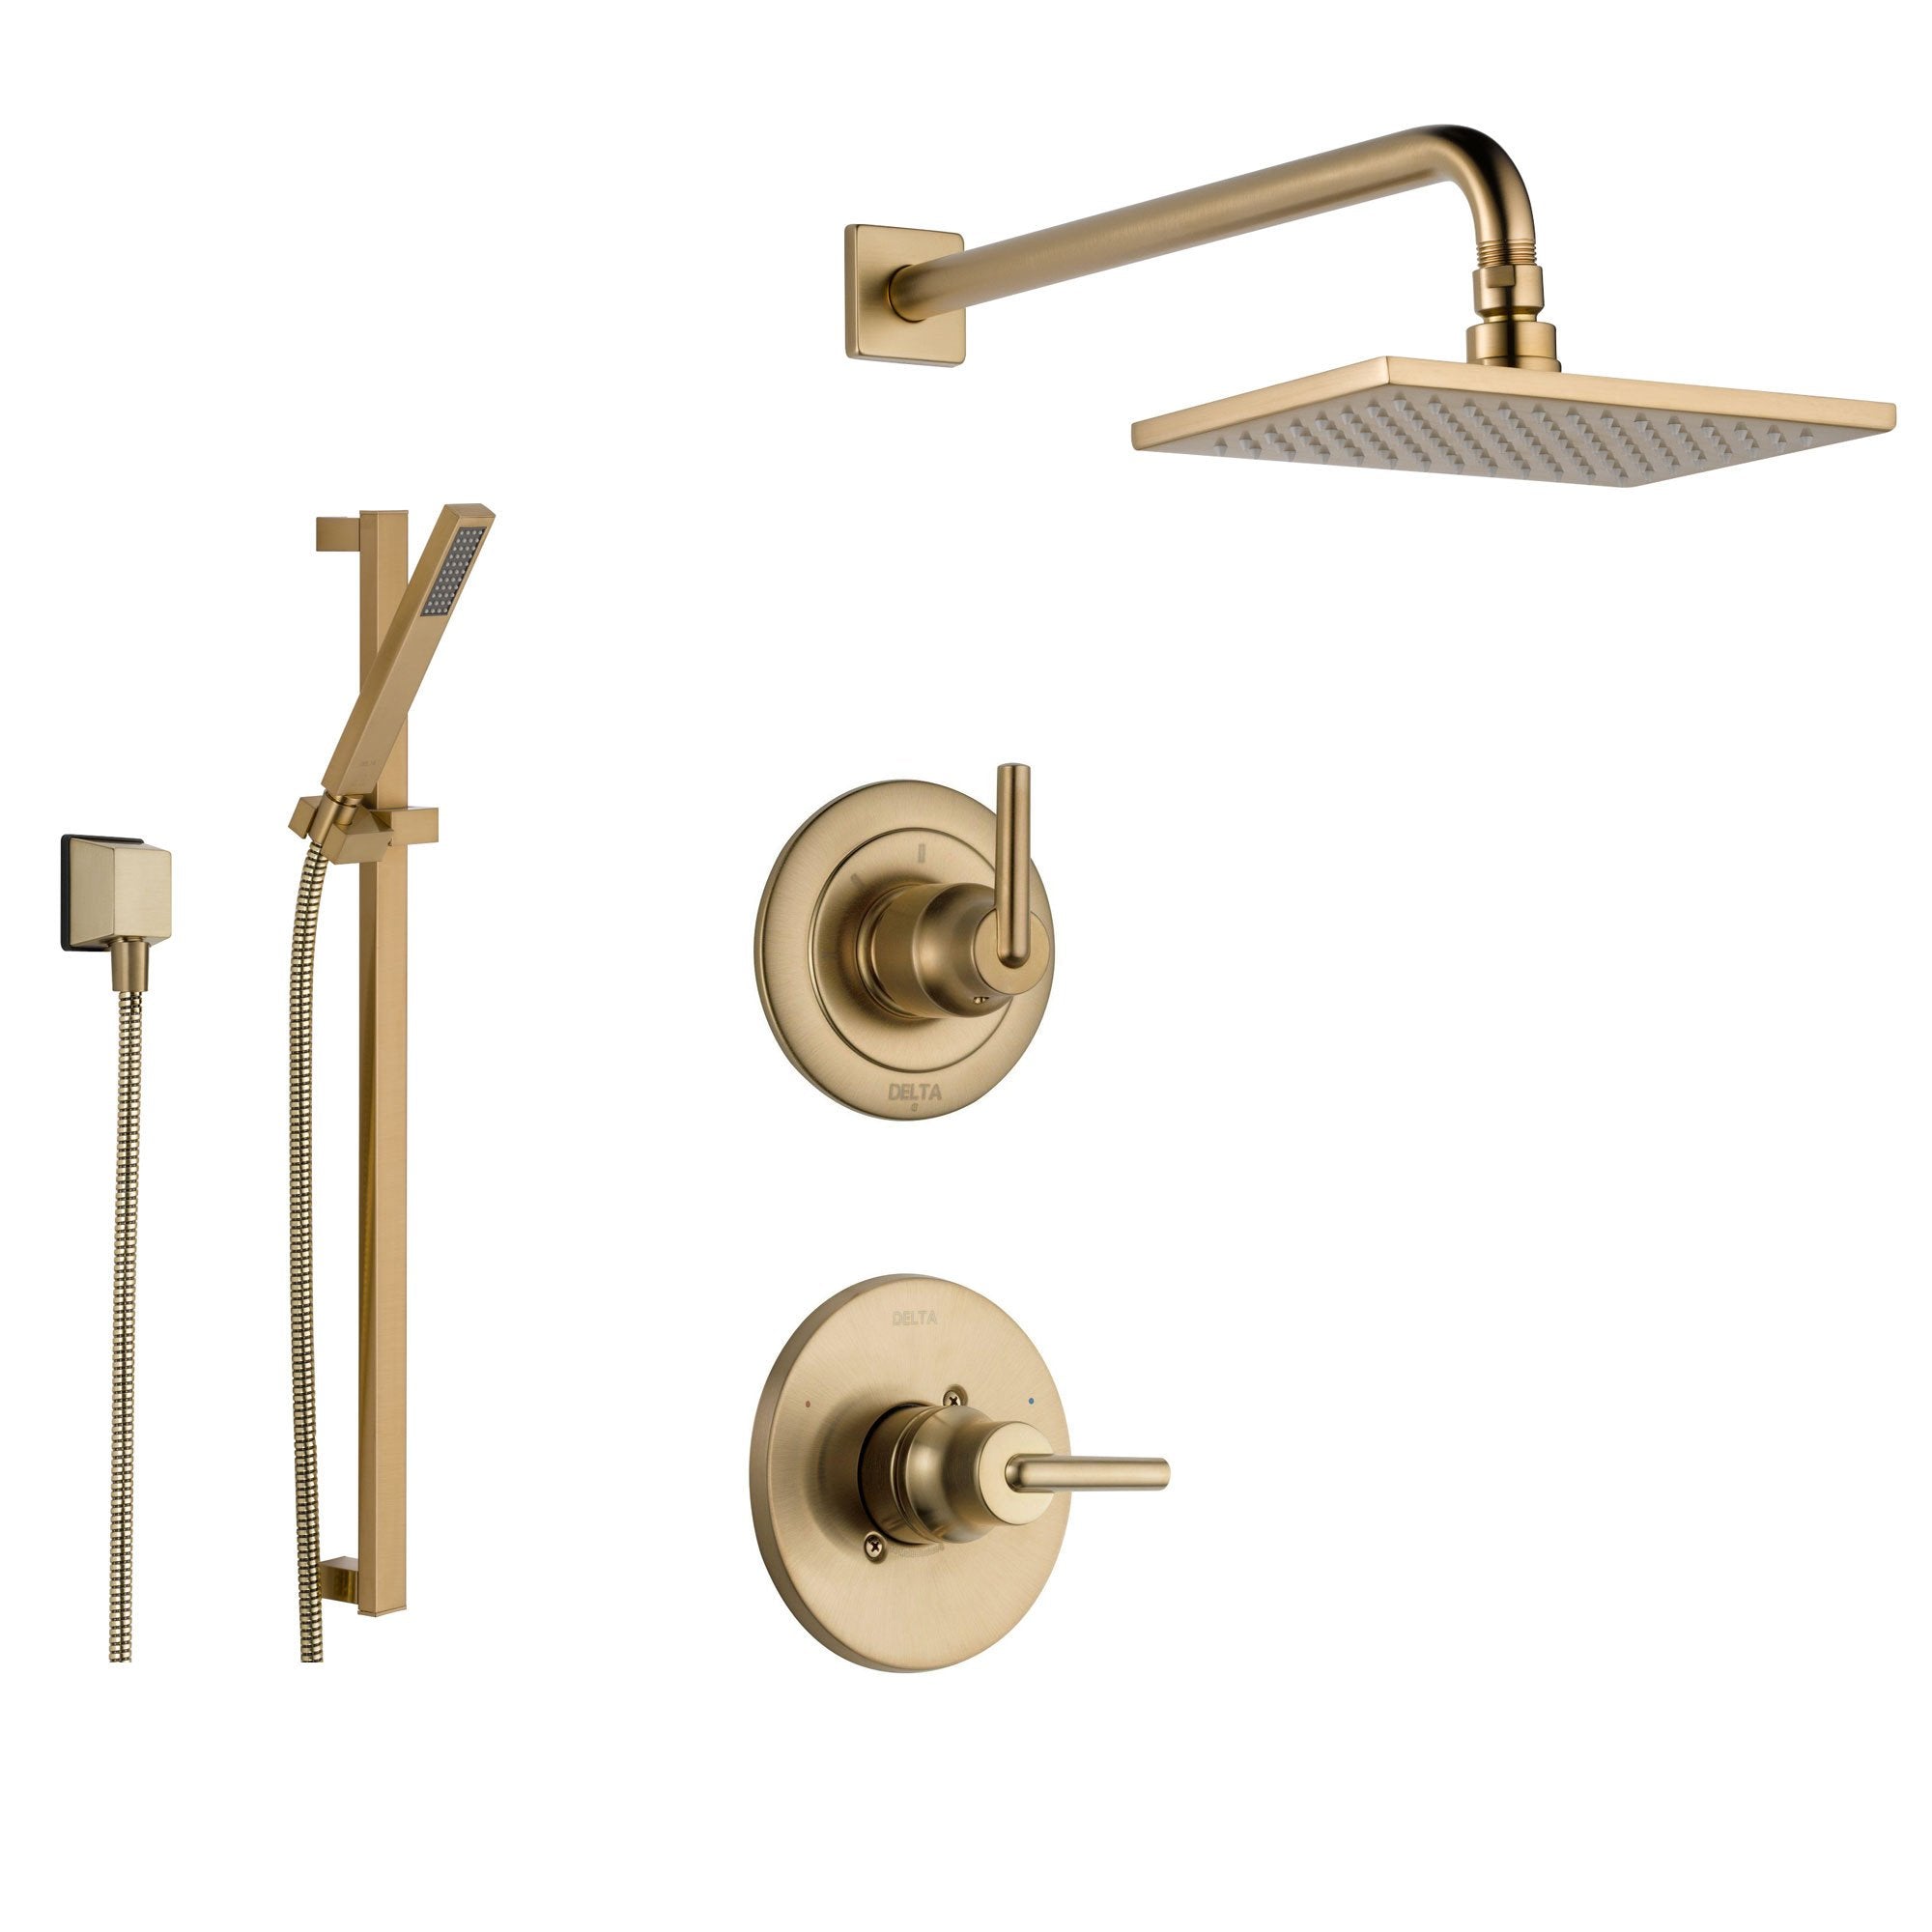 Delta Trinsic Champagne Bronze Shower System with Normal Shower Handle, 3-setting Diverter, Large Square Modern Rain Showerhead, and Handheld Shower SS145985CZ